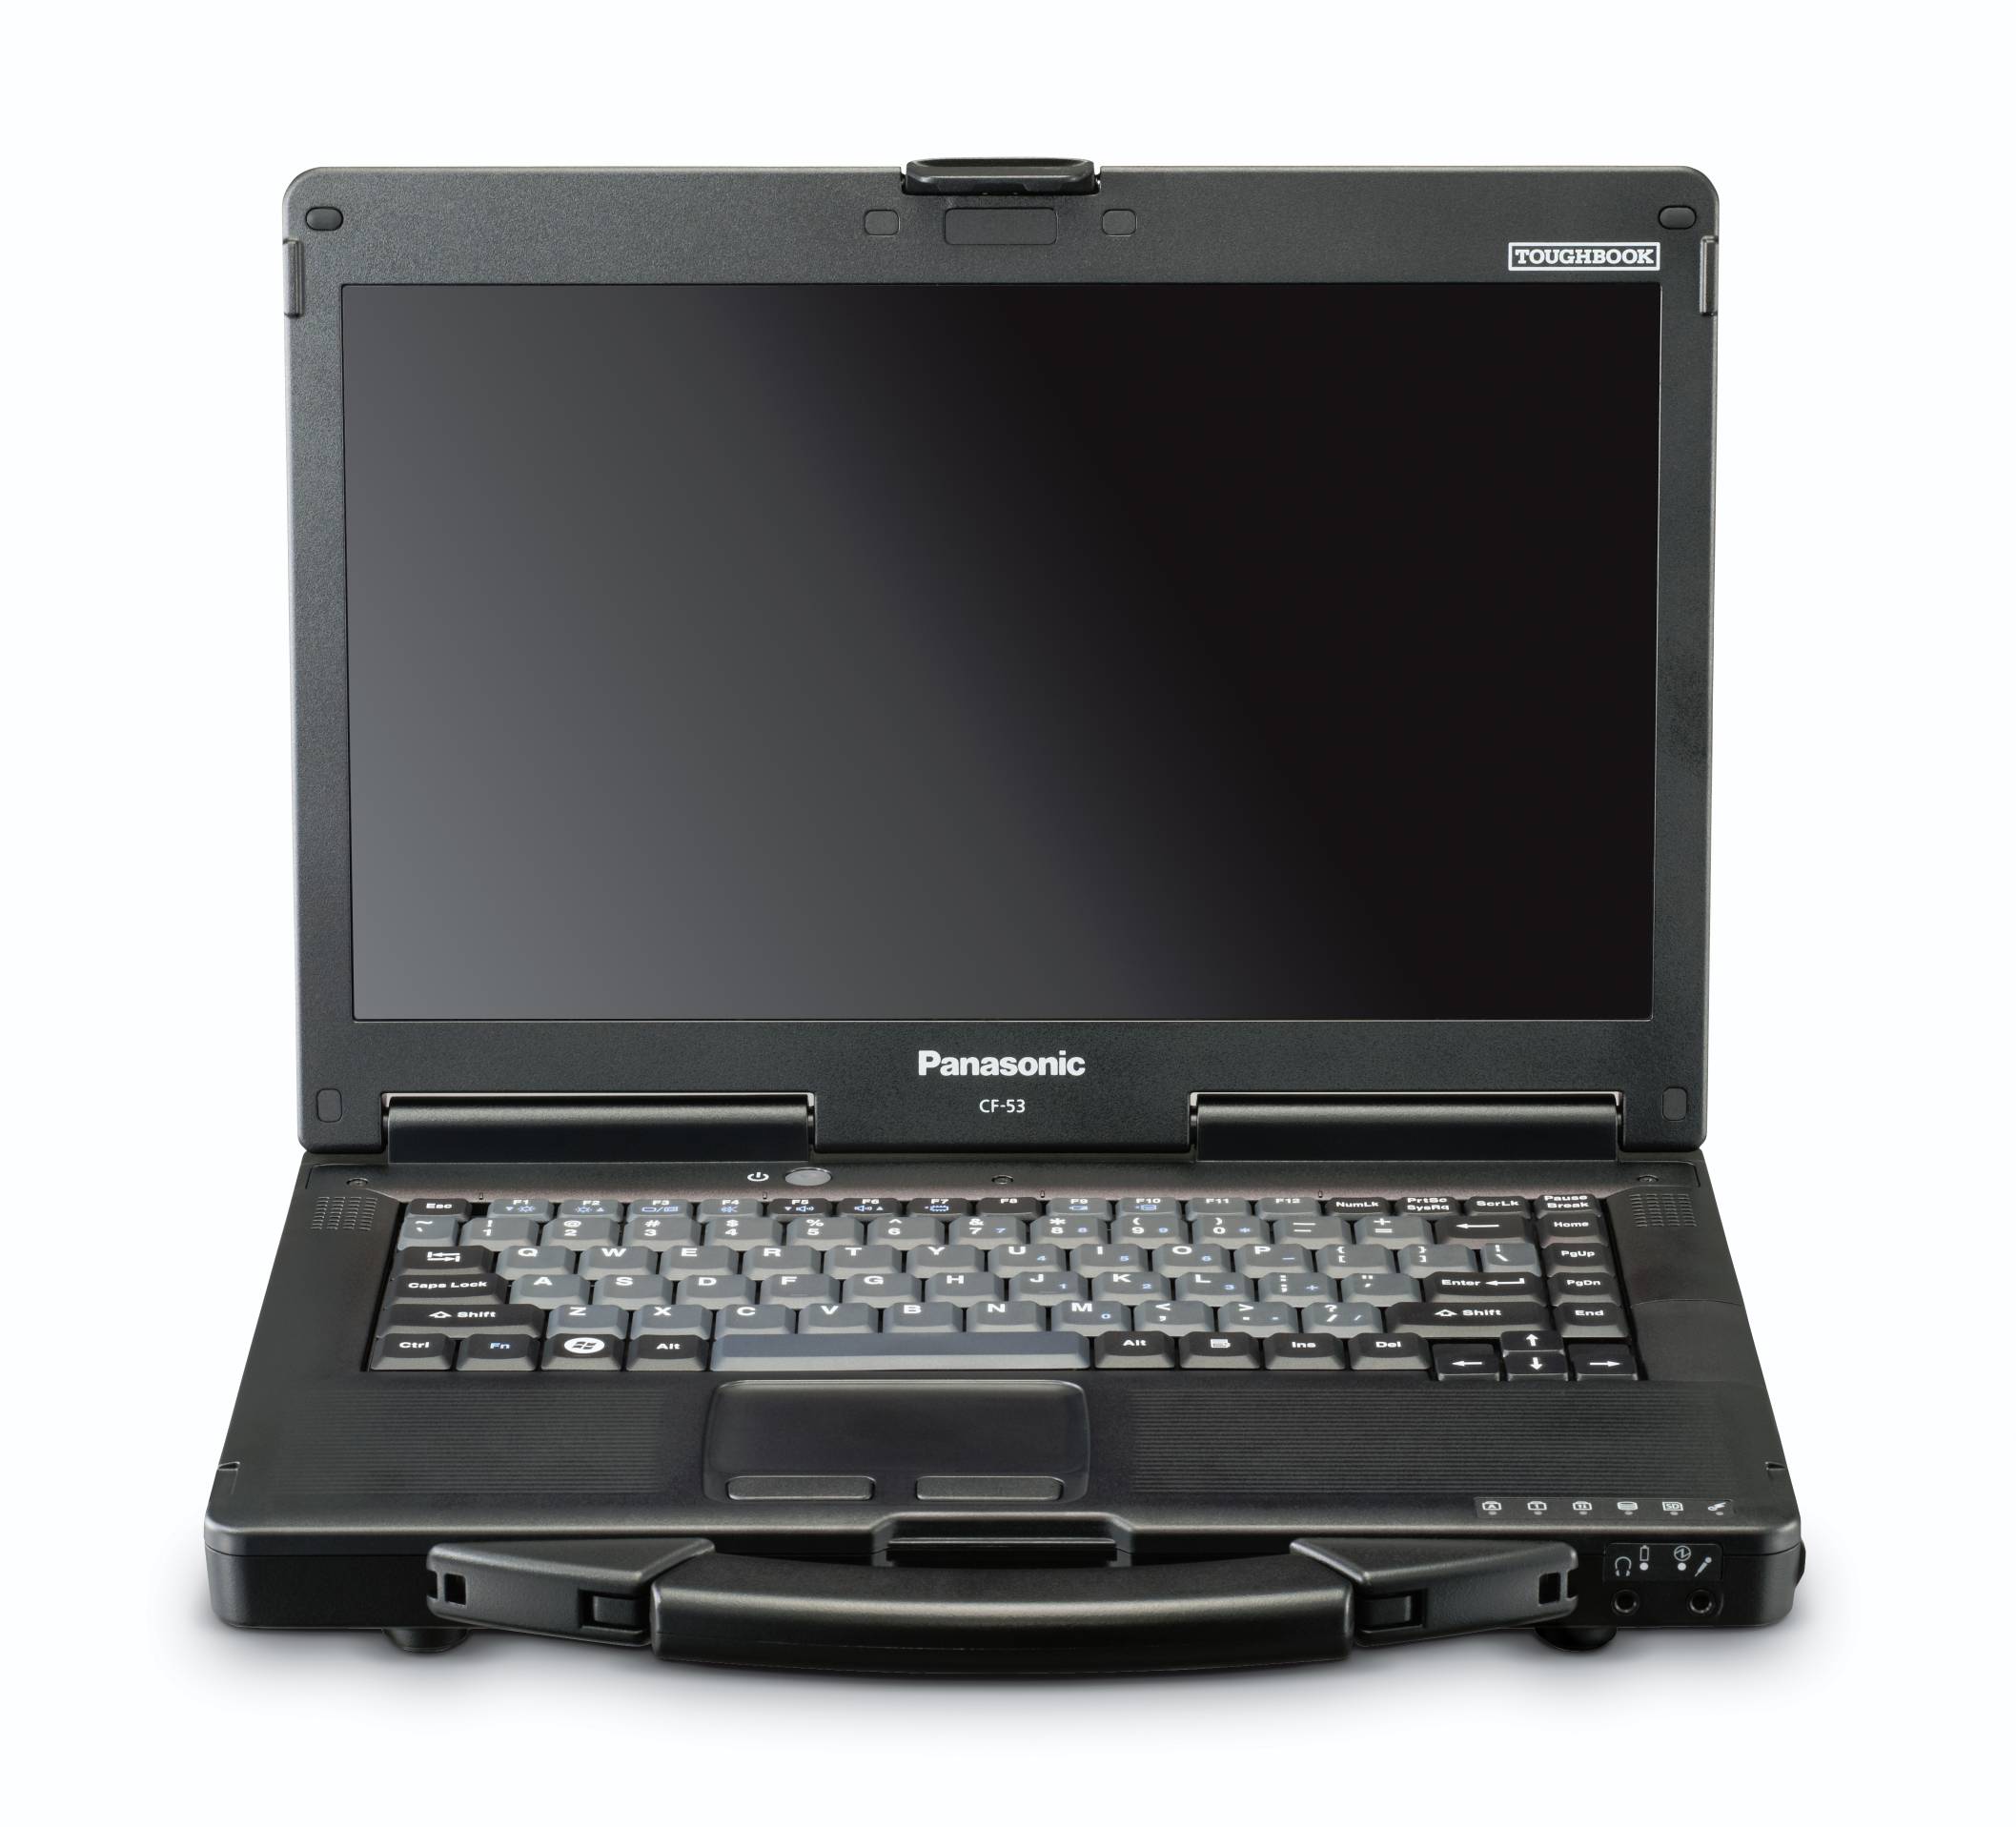 Used Panasonic A Grade CF-53 Toughbook 14-inch (High Definition-720p LED 1366 x 768) 2.1GHz Core i5 250GB HD 2 GB Memory Win 7 Pro OS Power Adapter Included - image 1 of 3